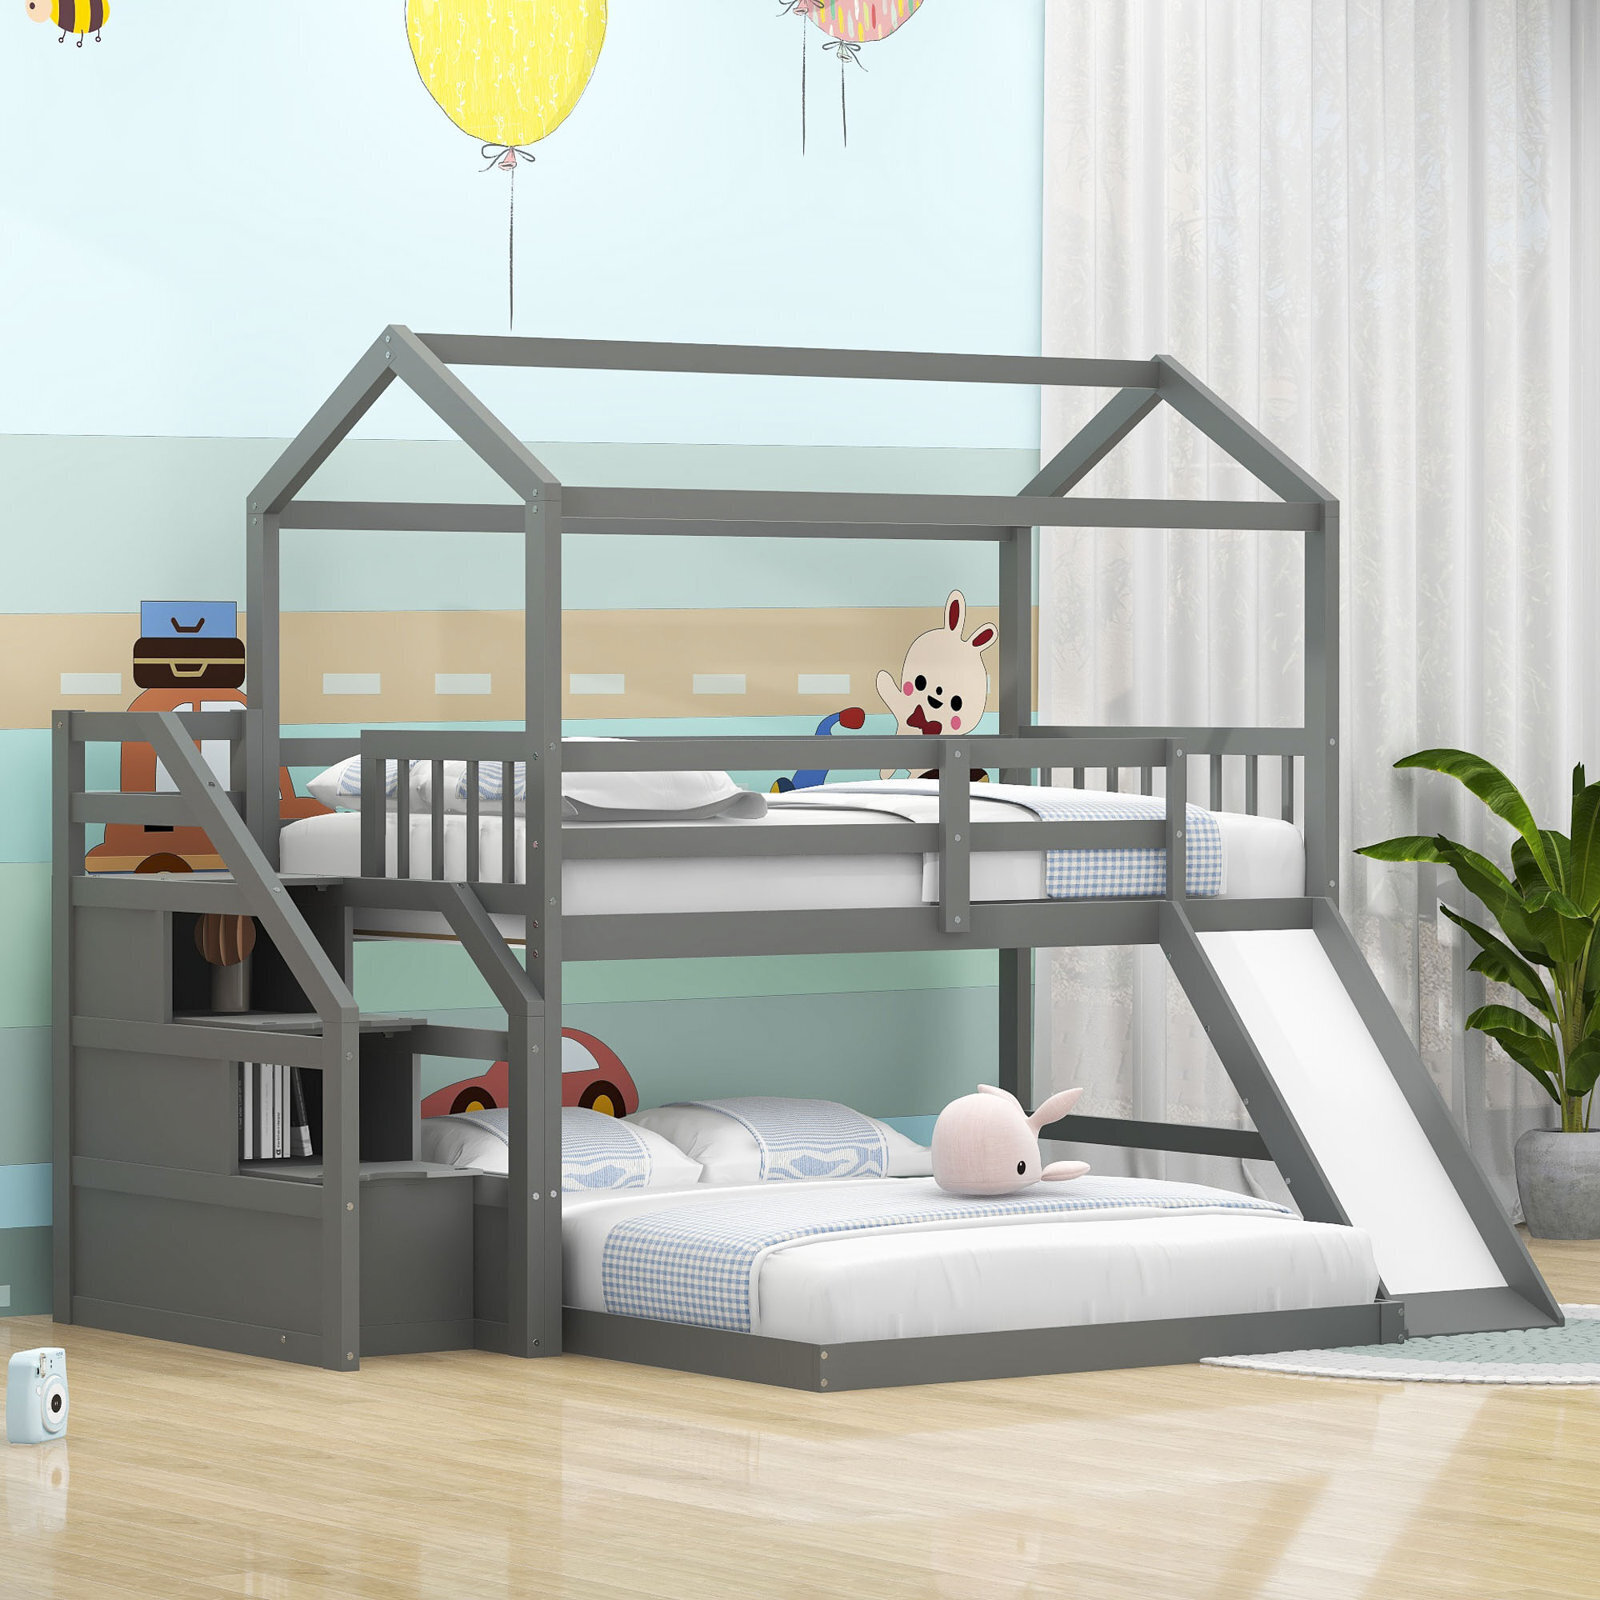 Bunk Bed With Slide - Ideas On Foter